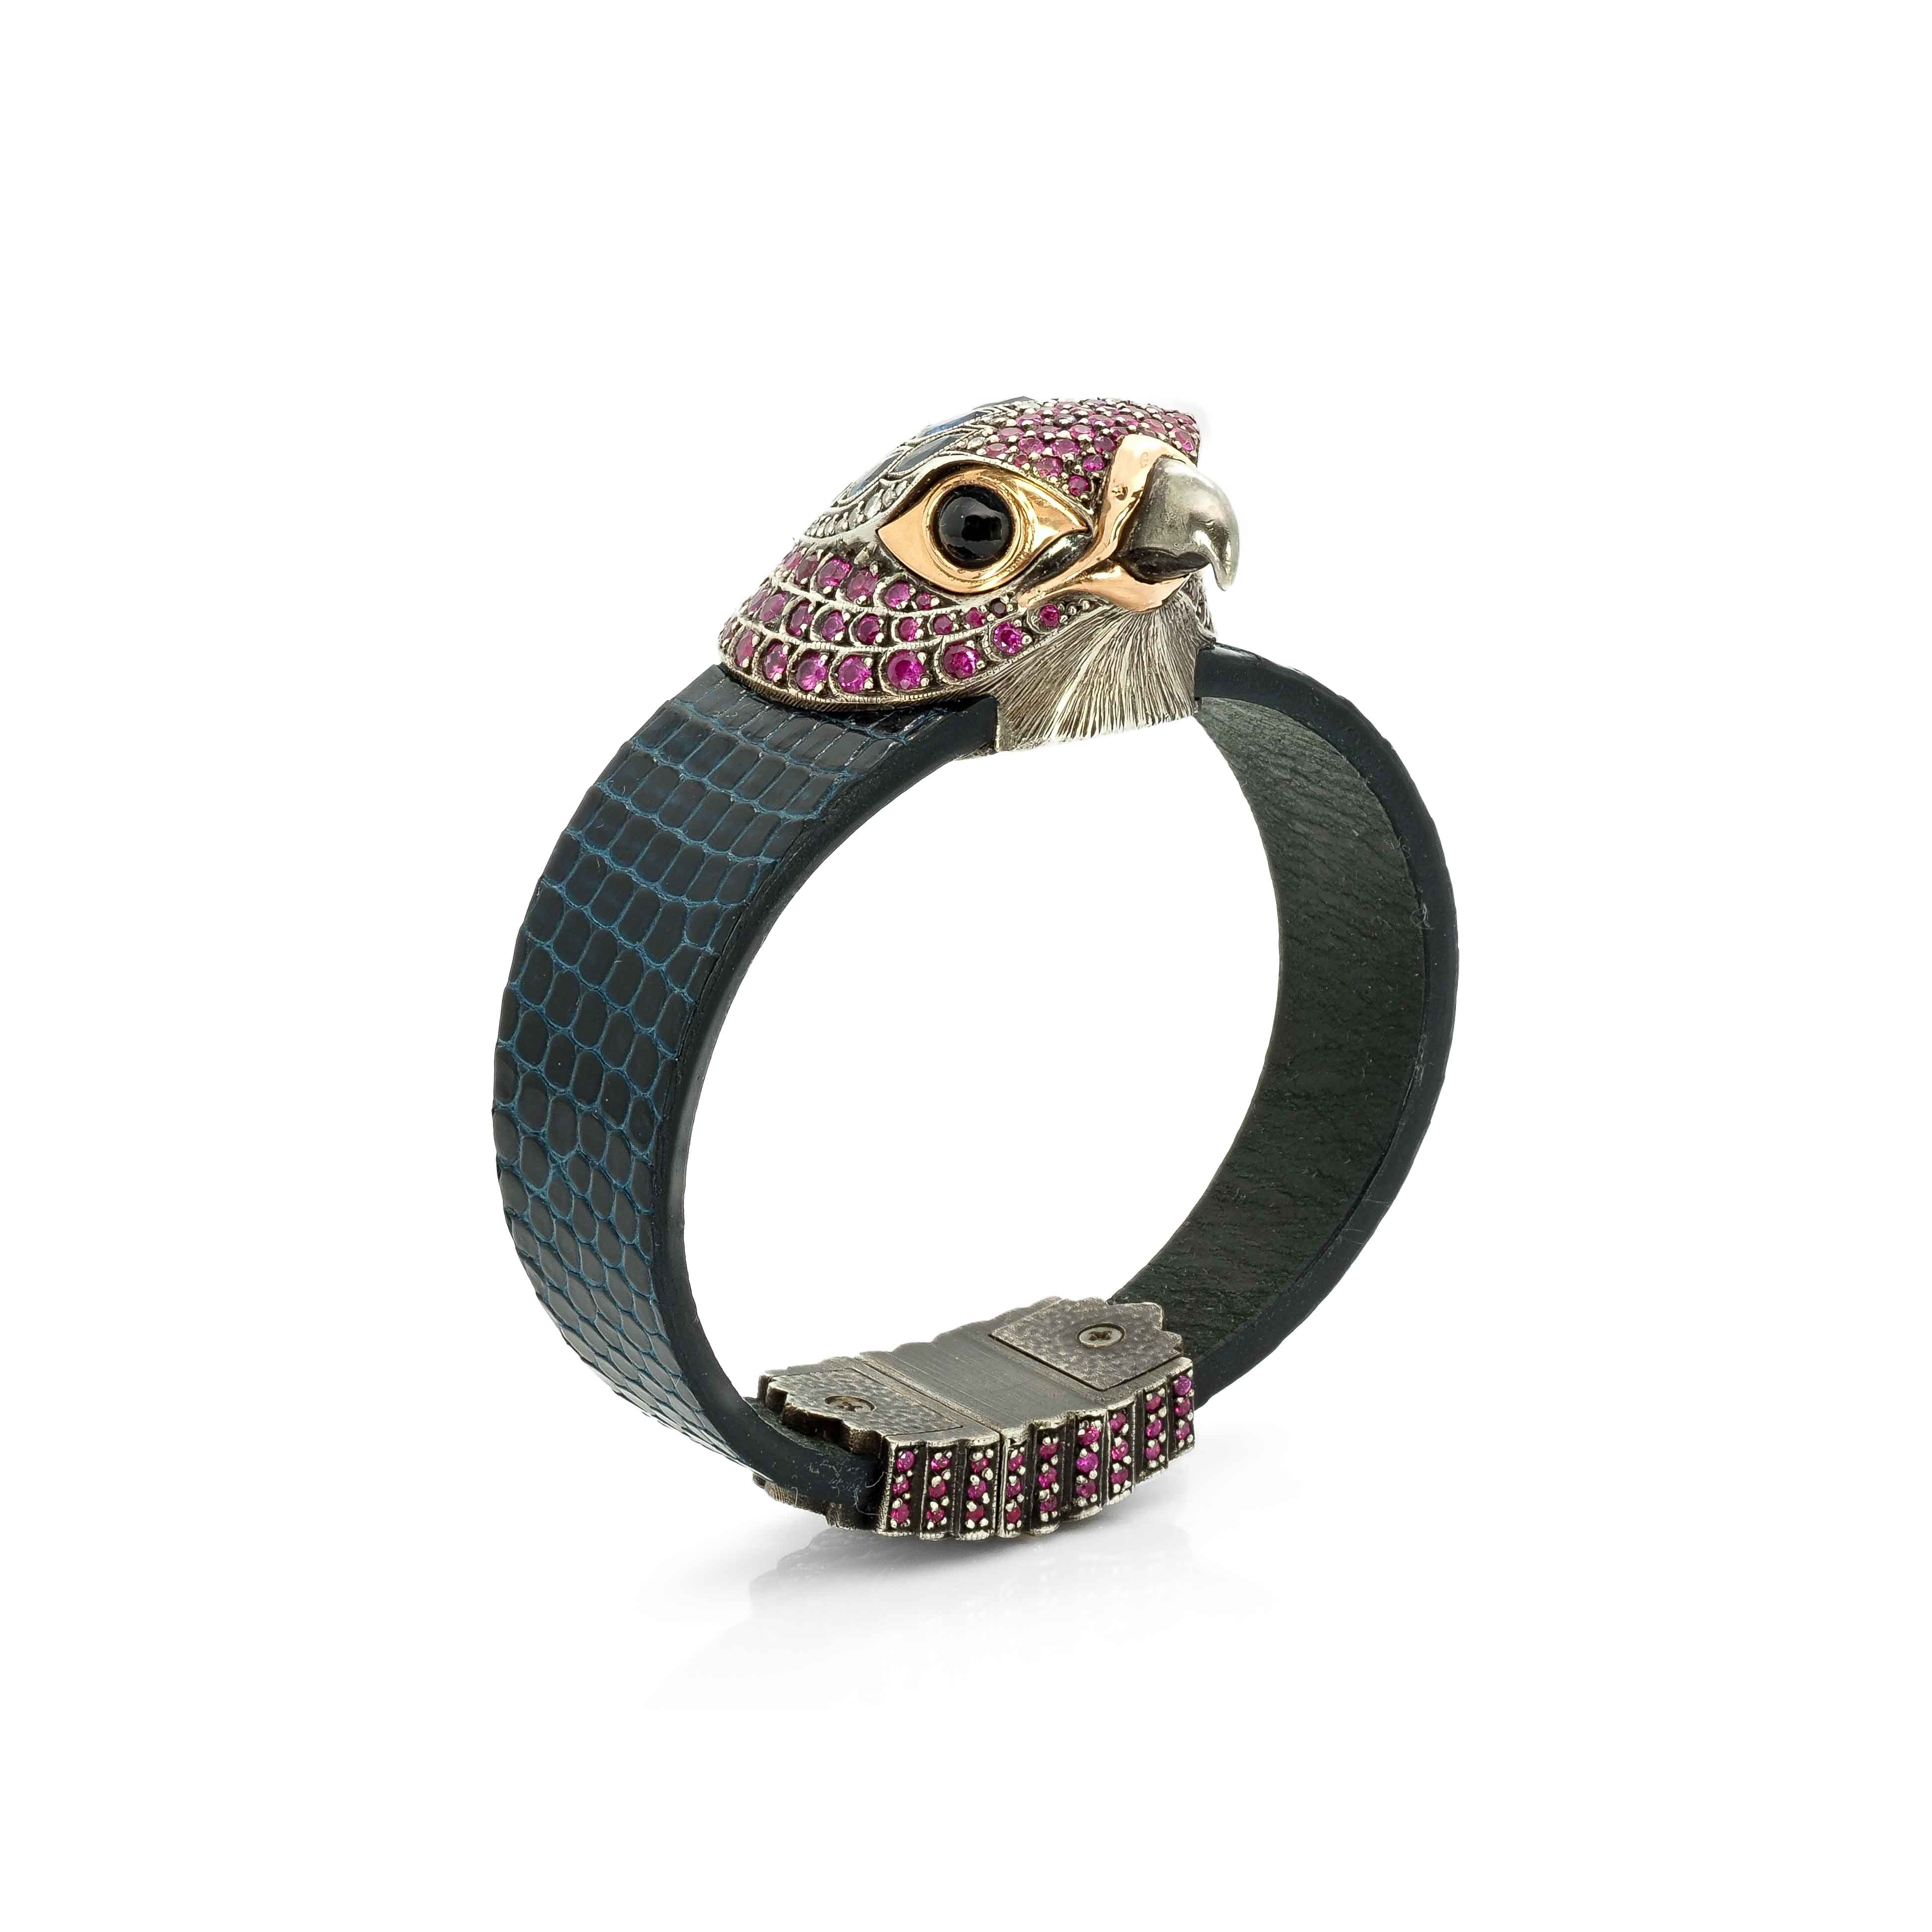 Taru Jewelry Falcon Bracelet is crafted from 18K rose gold, sterling silver, and featuring a stunning array of blue and pink sapphires in various cuts. The falcon is known for its sharp and piercing gaze, and this is perfectly captured in the design of this bracelet.